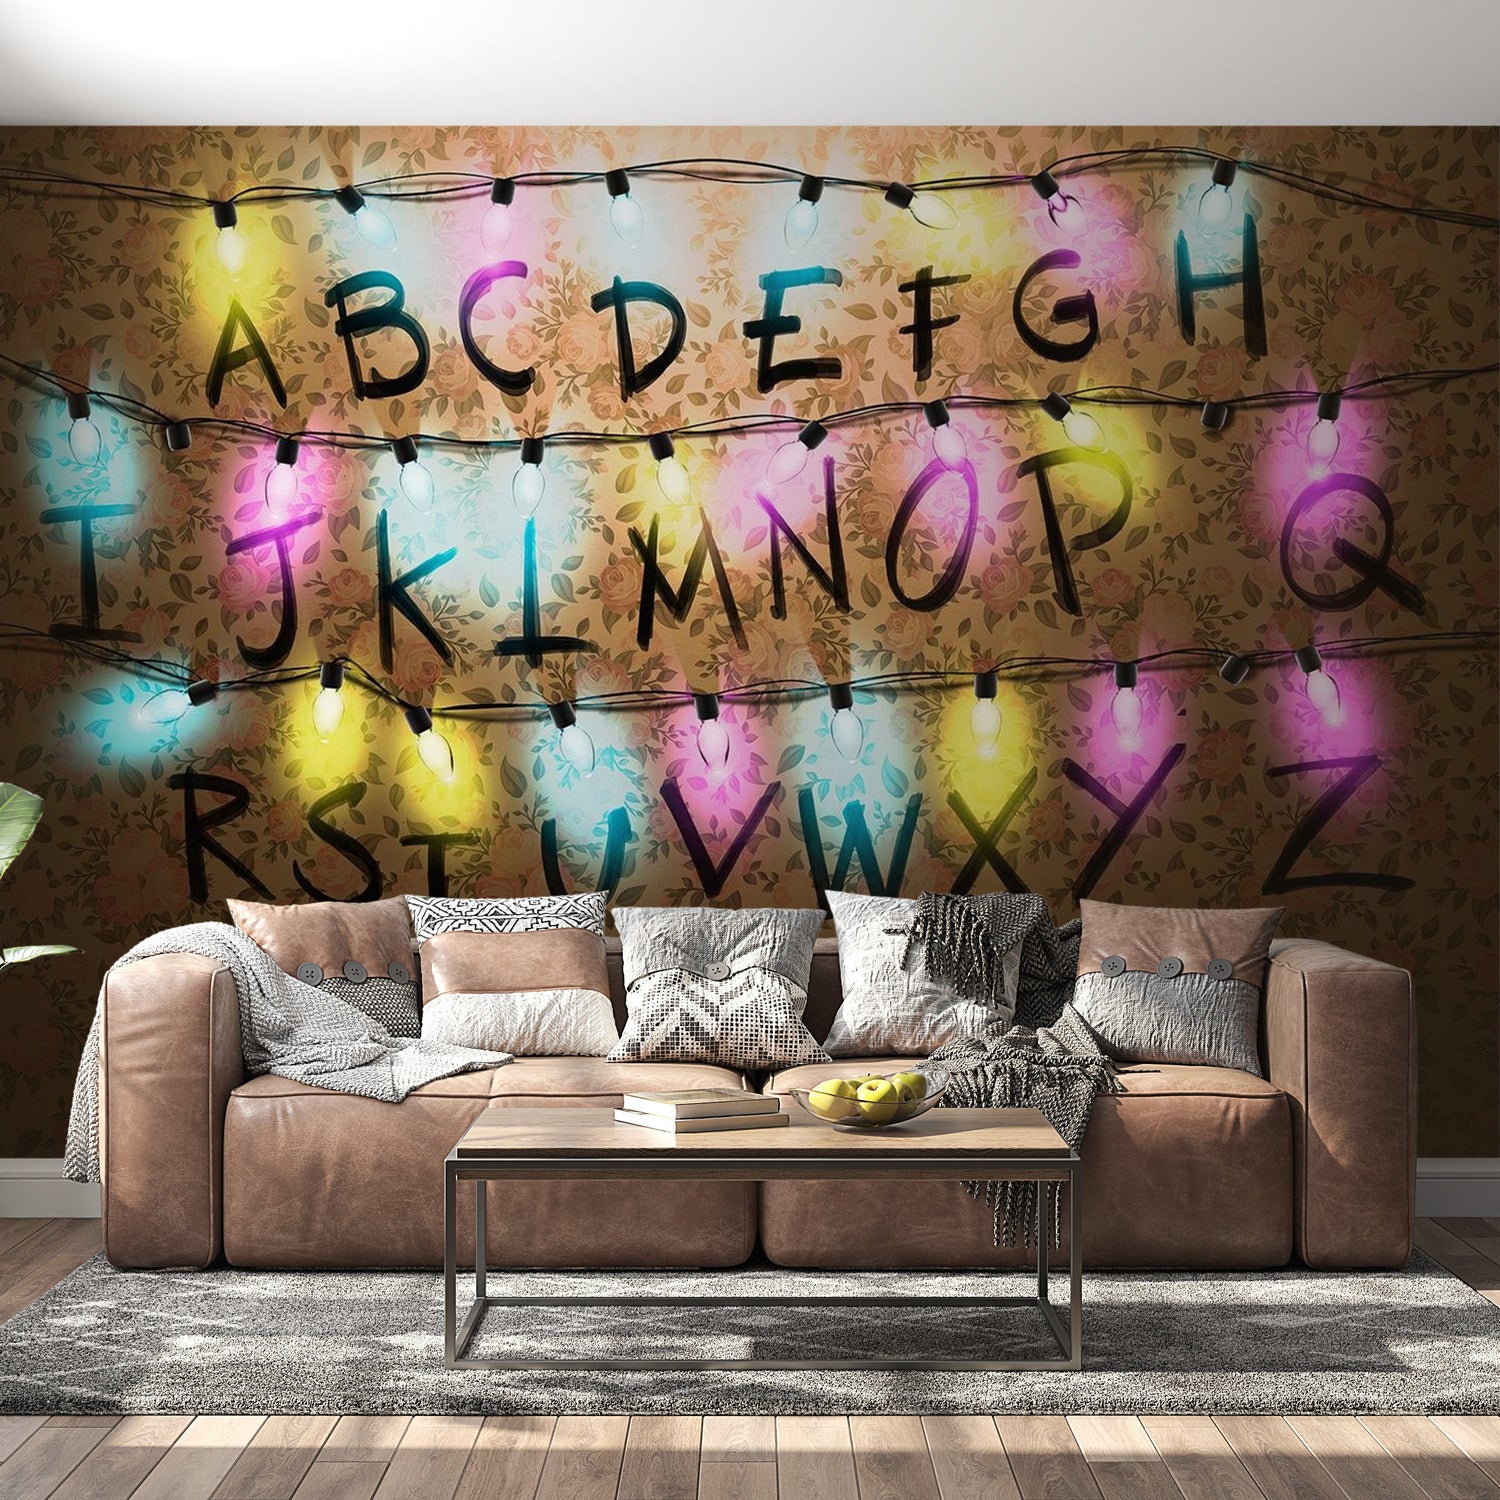 Peel & Stick Wall Mural - Alphabet Lights - Removable Wall Decals